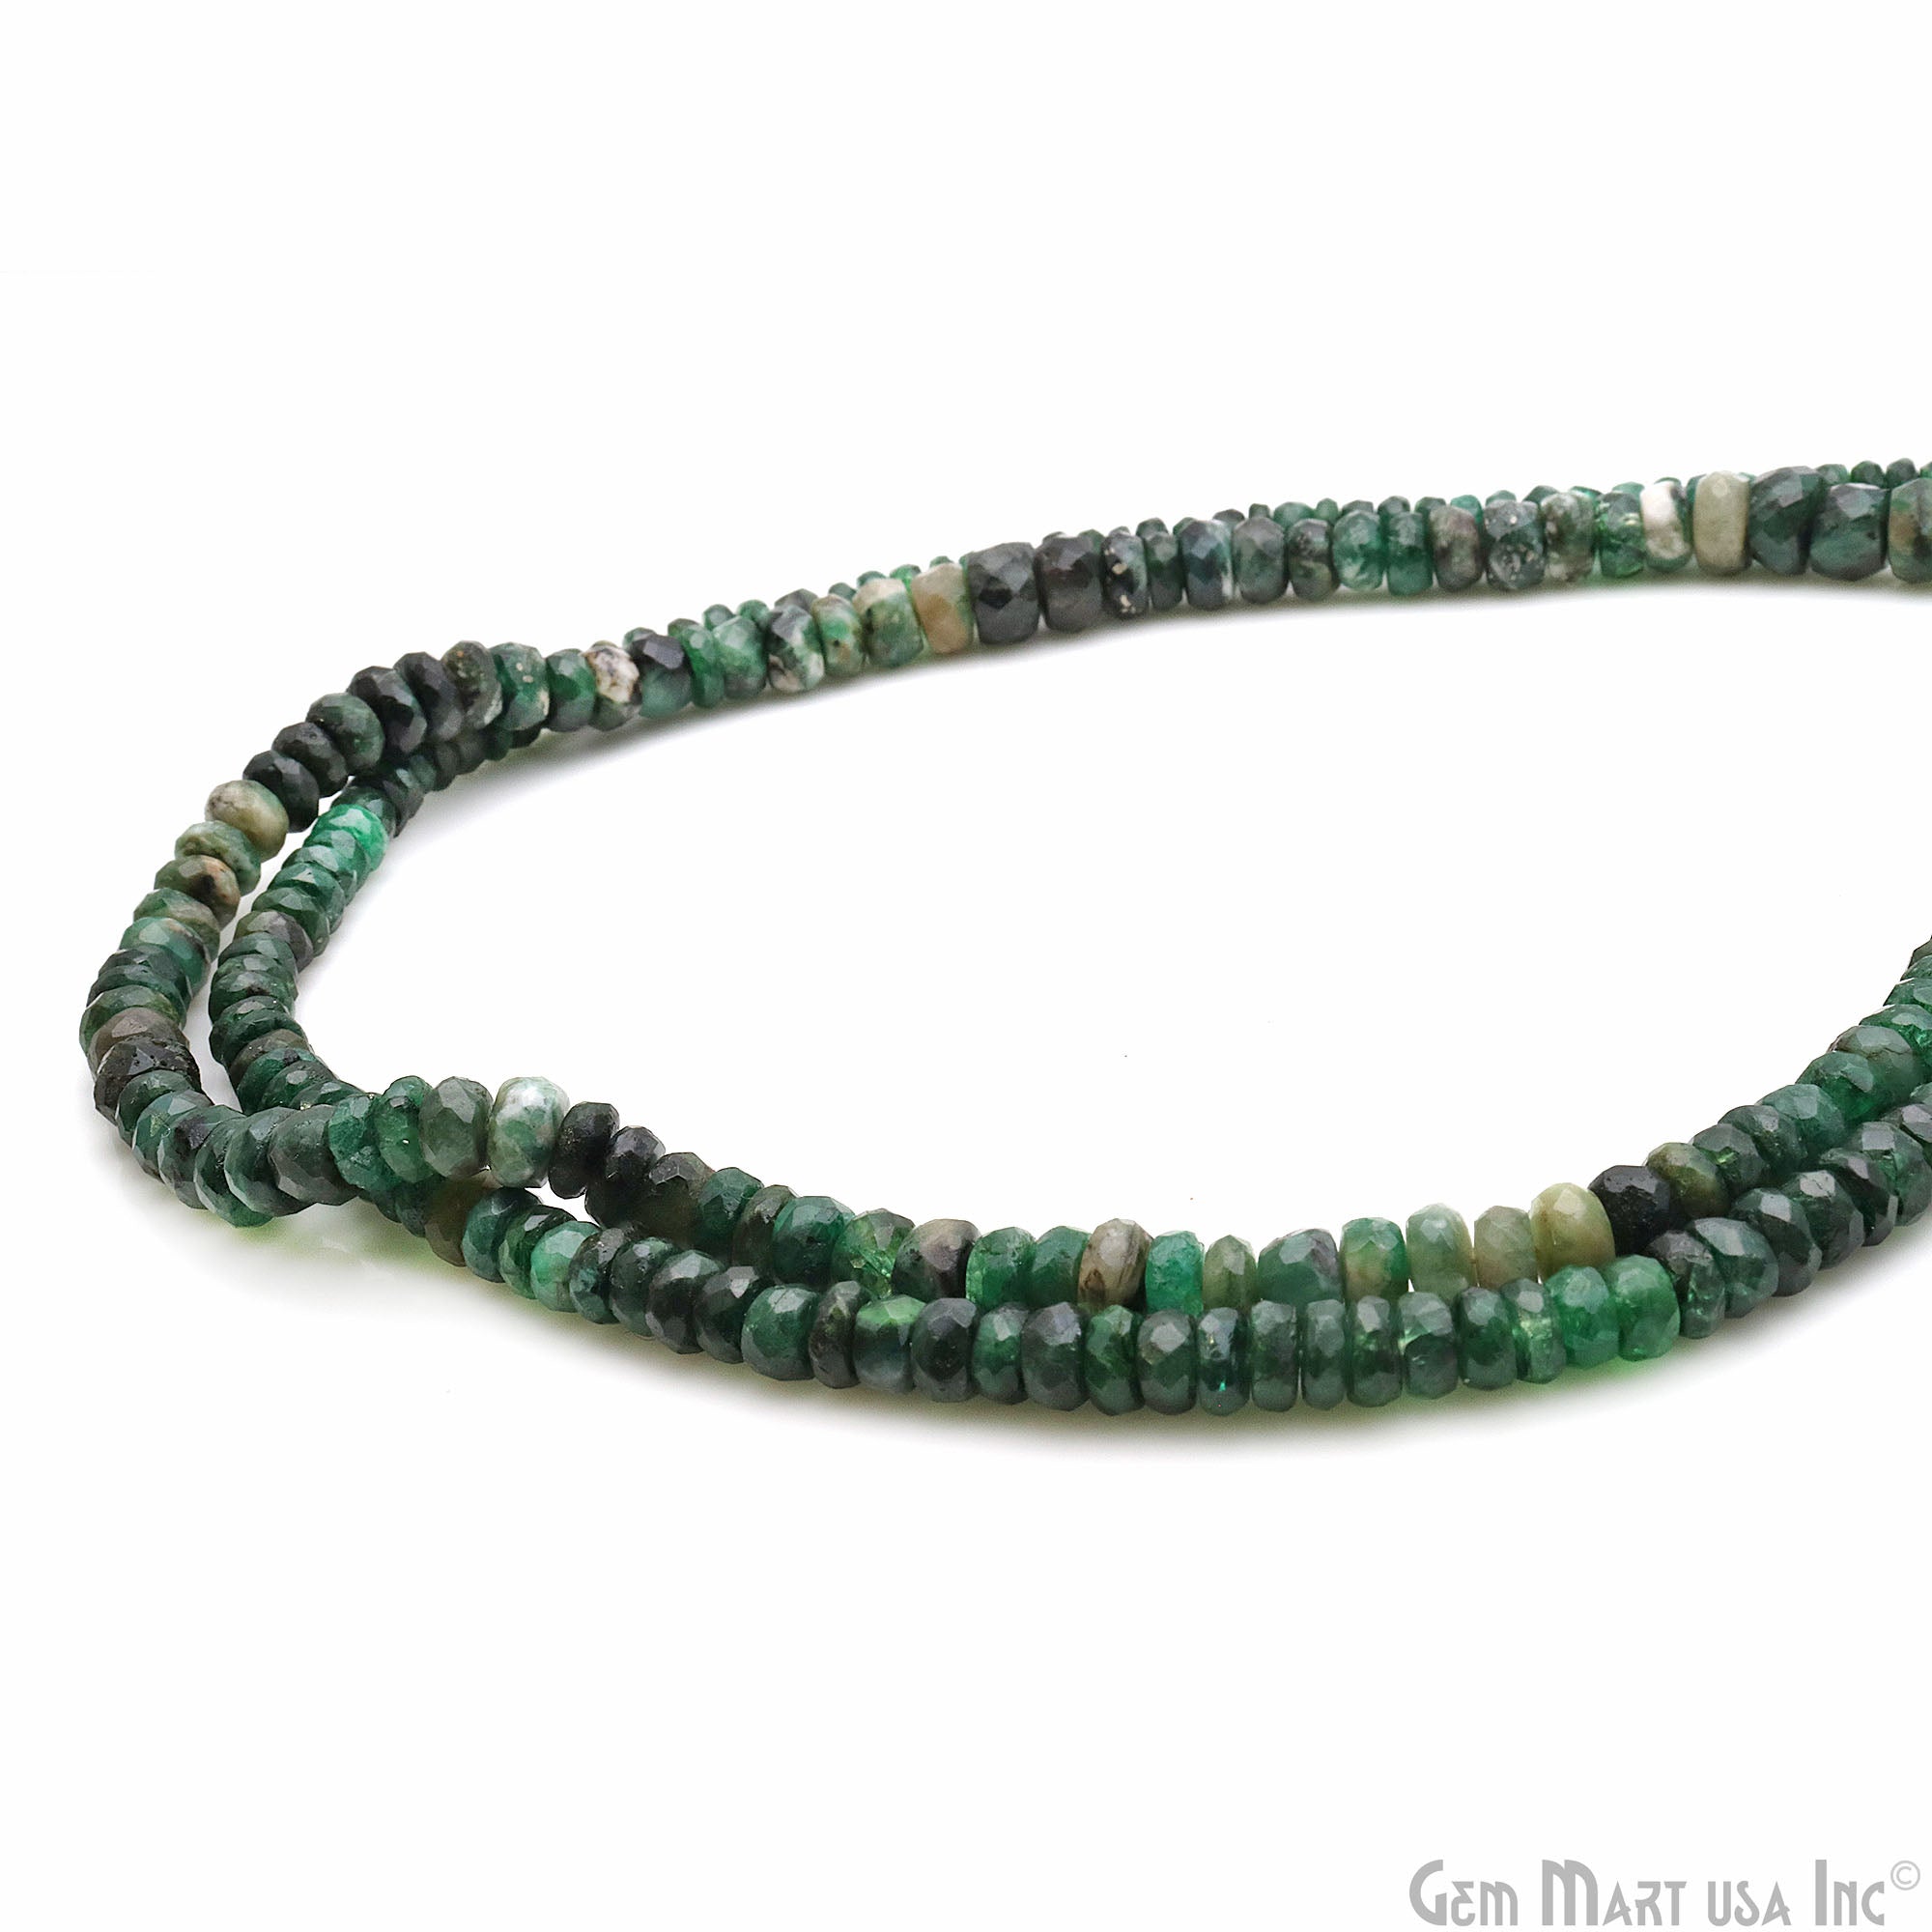 Emerald 6-7mm Gemstone Faceted Beads Rondelle Strand 13"